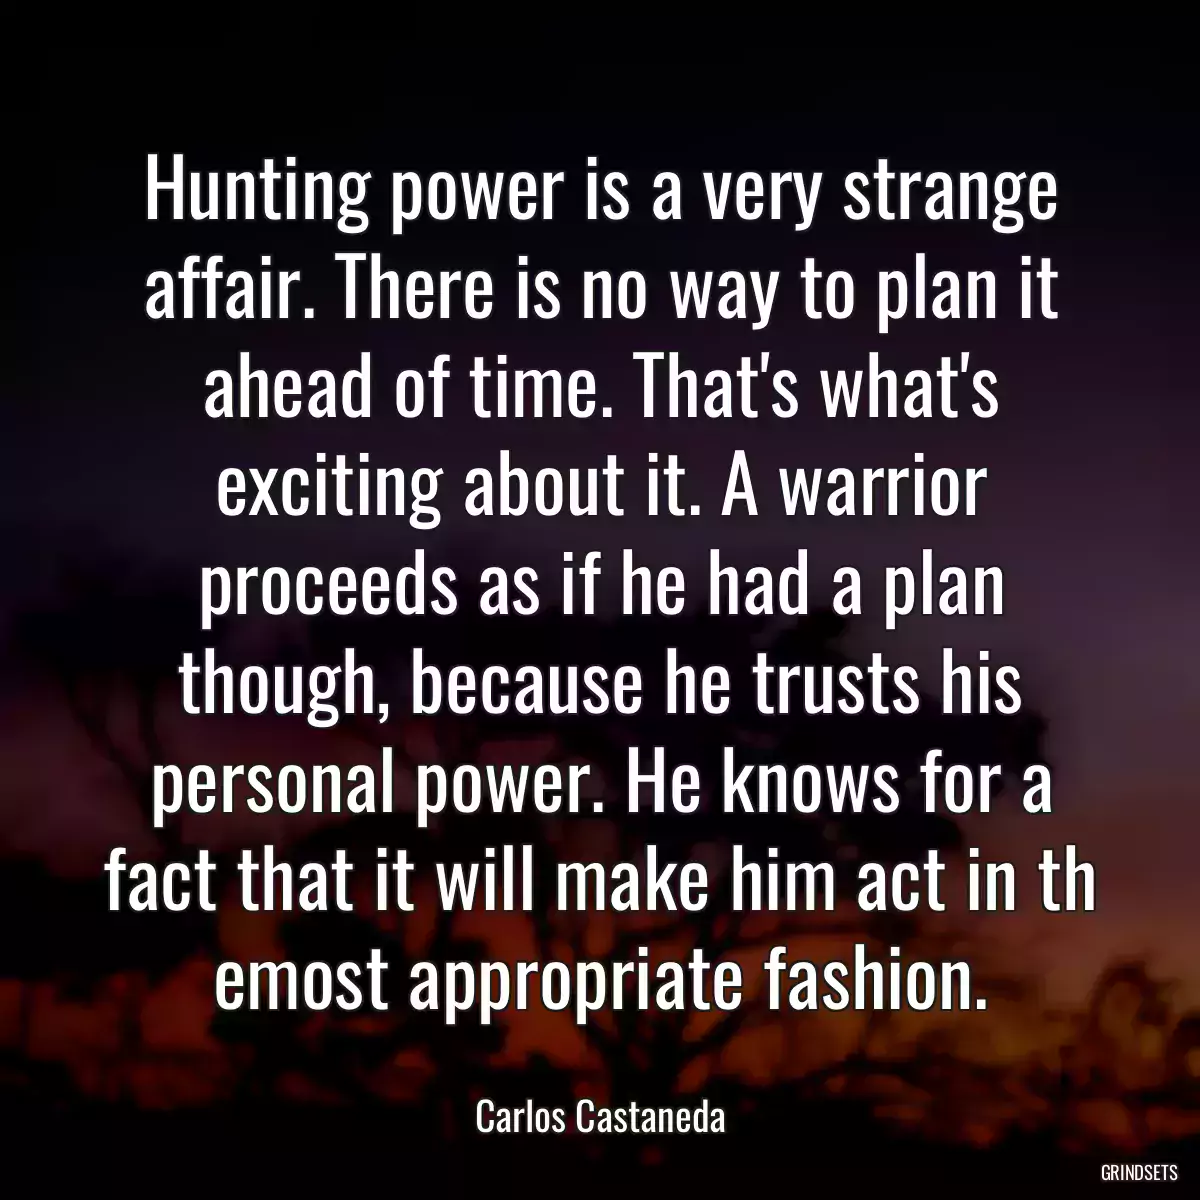 Hunting power is a very strange affair. There is no way to plan it ahead of time. That\'s what\'s exciting about it. A warrior proceeds as if he had a plan though, because he trusts his personal power. He knows for a fact that it will make him act in th emost appropriate fashion.